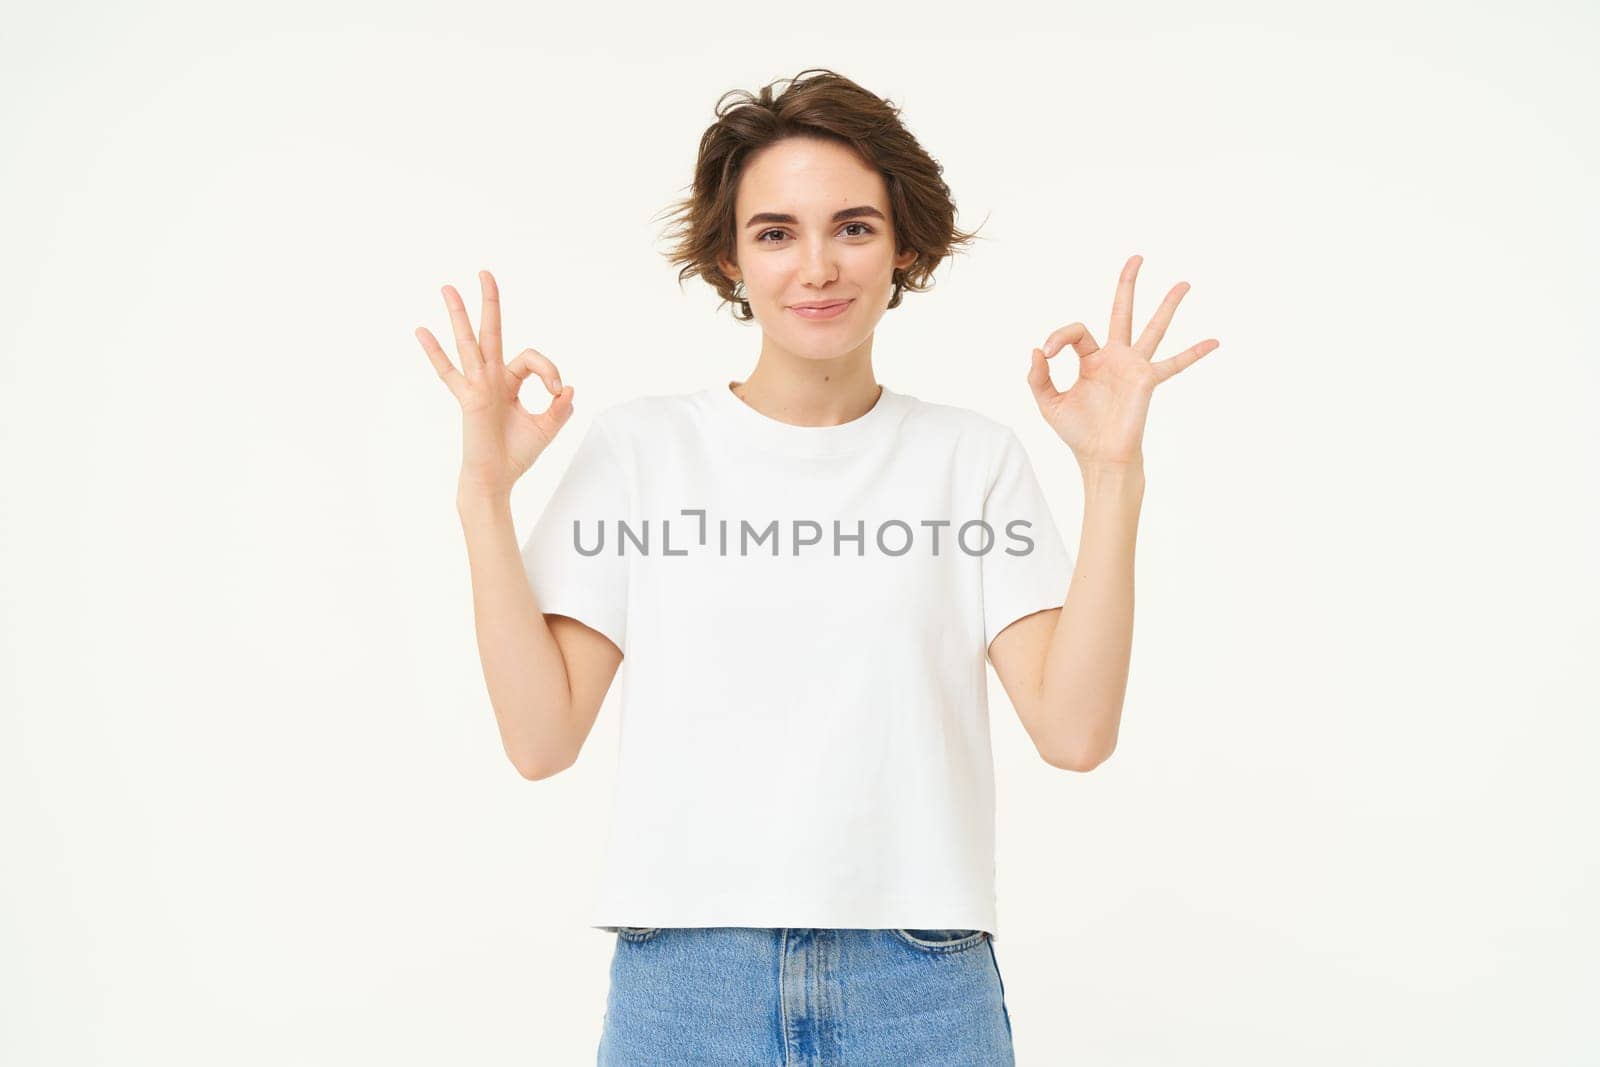 Portrait of young brunette woman, look confident, shows okay, ok sign, approves something, recommending, give positive feedback, stands over white background.